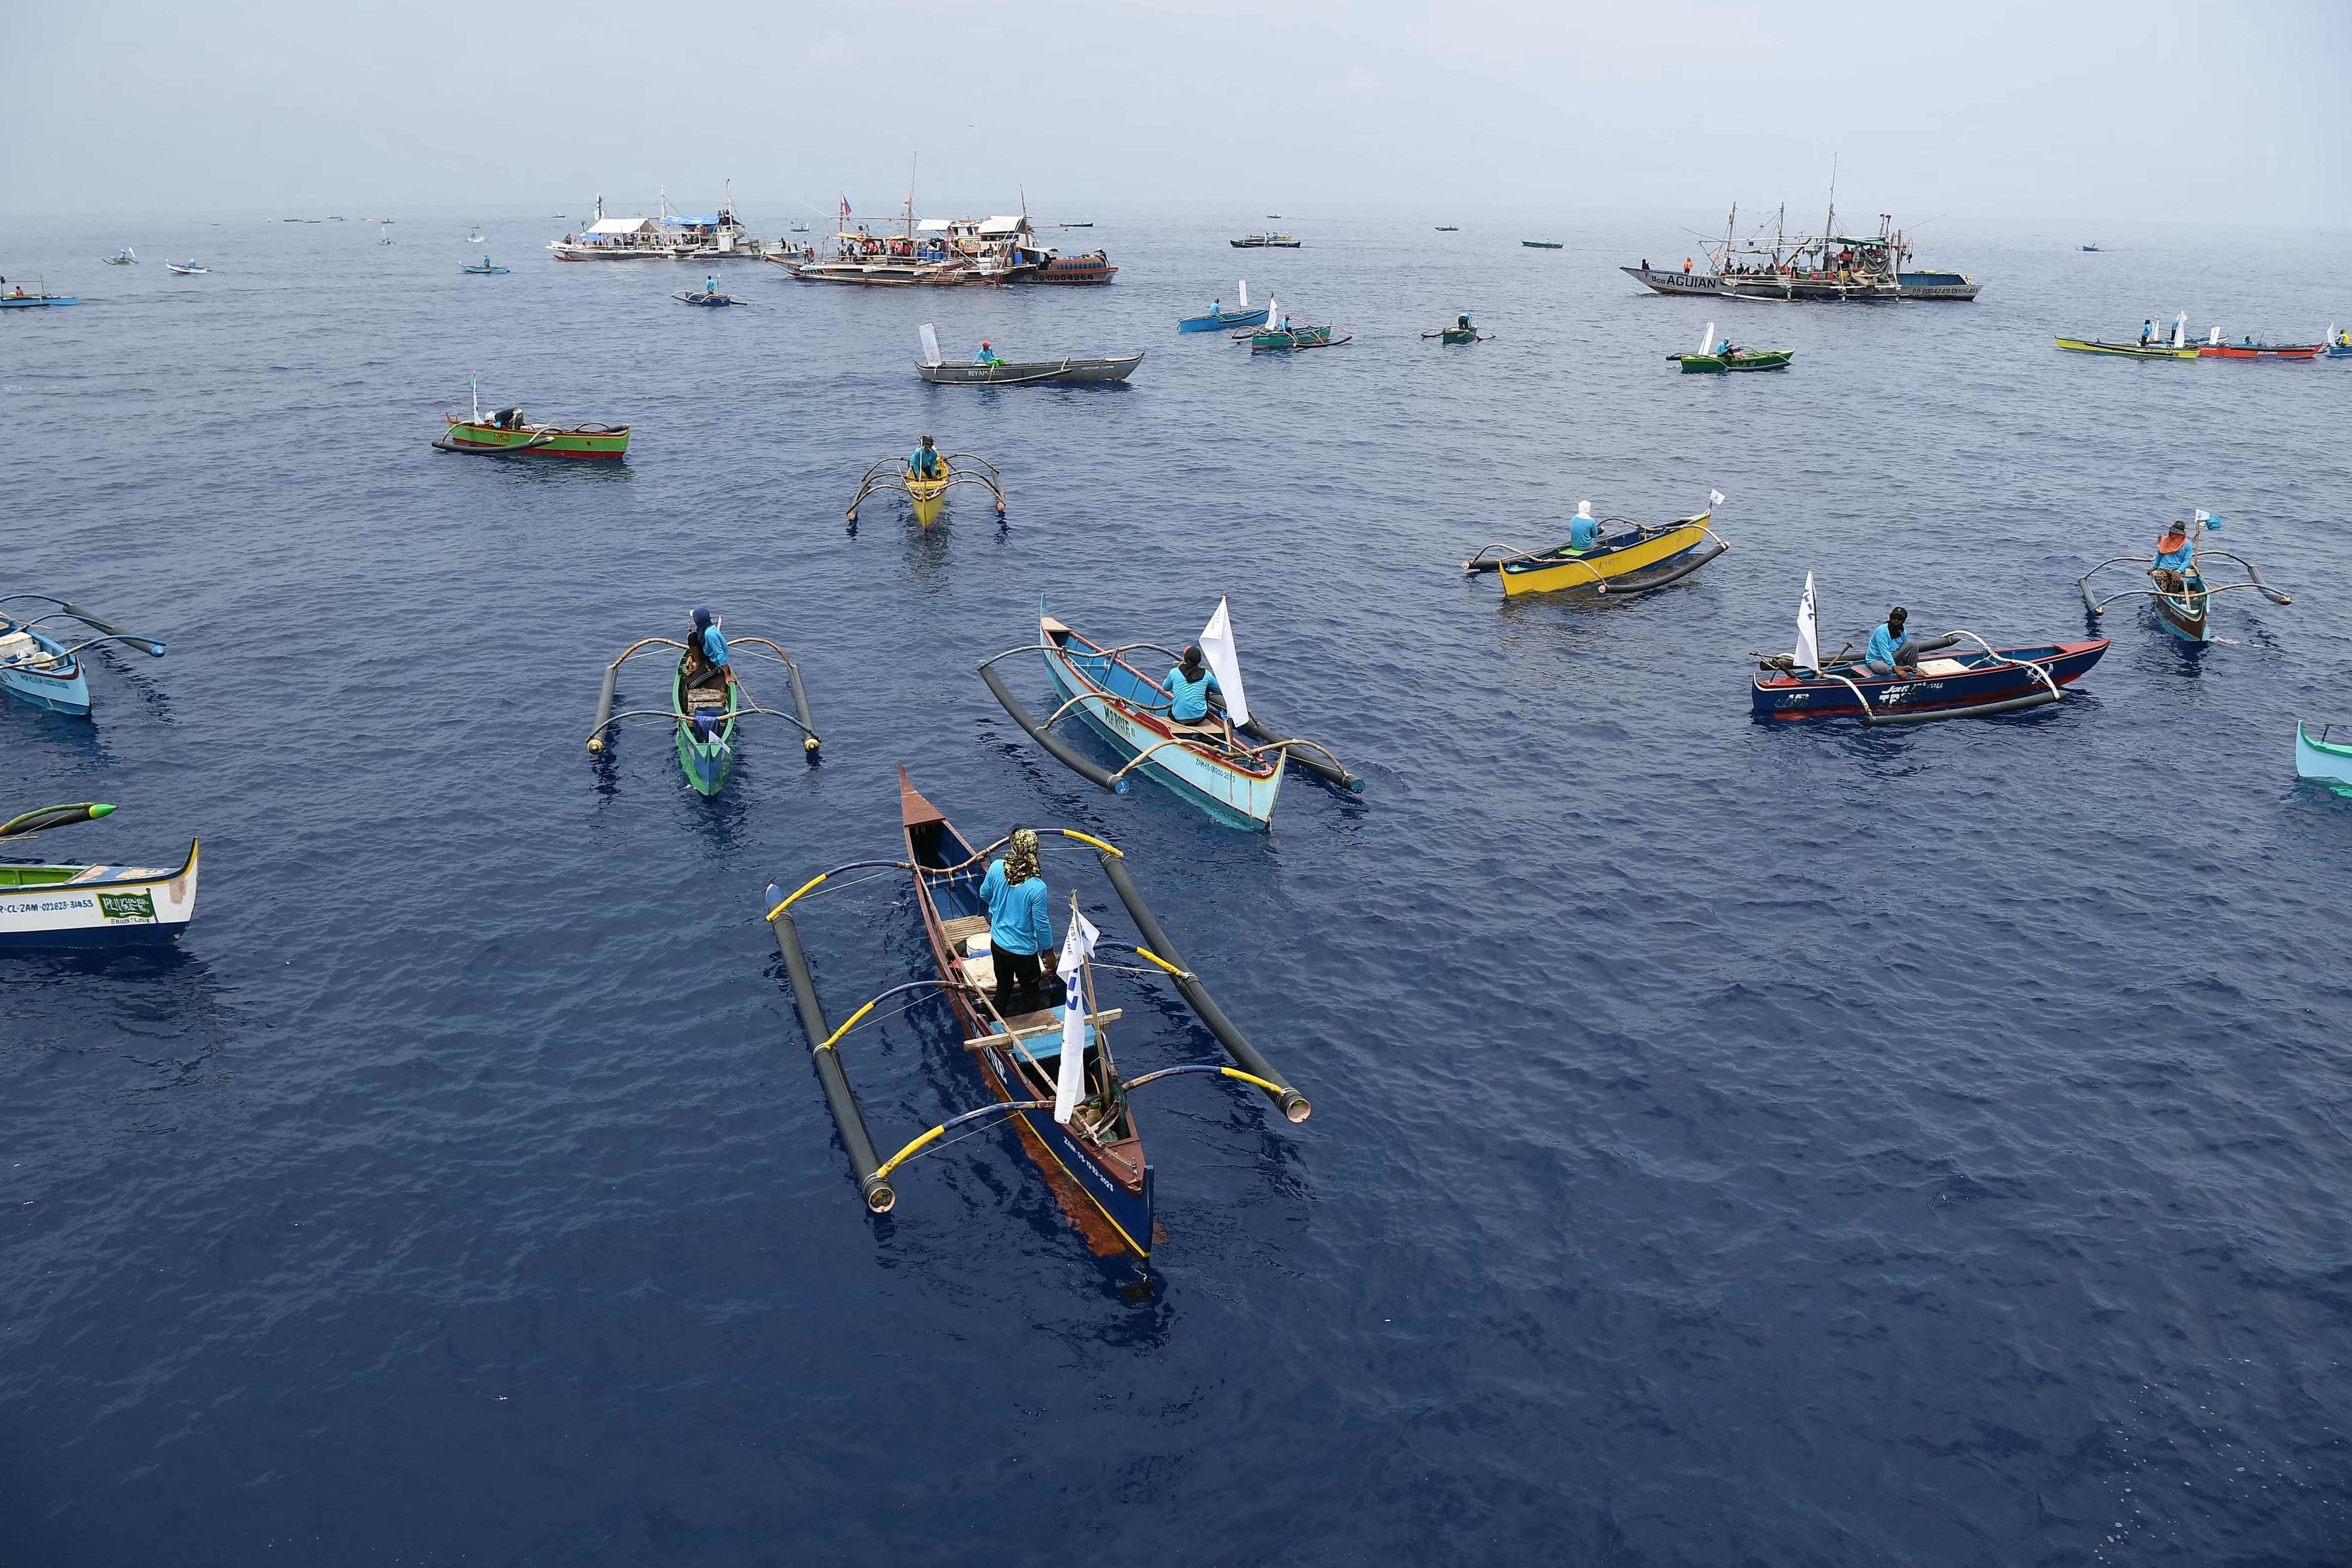 Philippine fishermen and volunteers from a civilian group arrive at a meeting point in the South China Sea on May 15. Photo: AFP